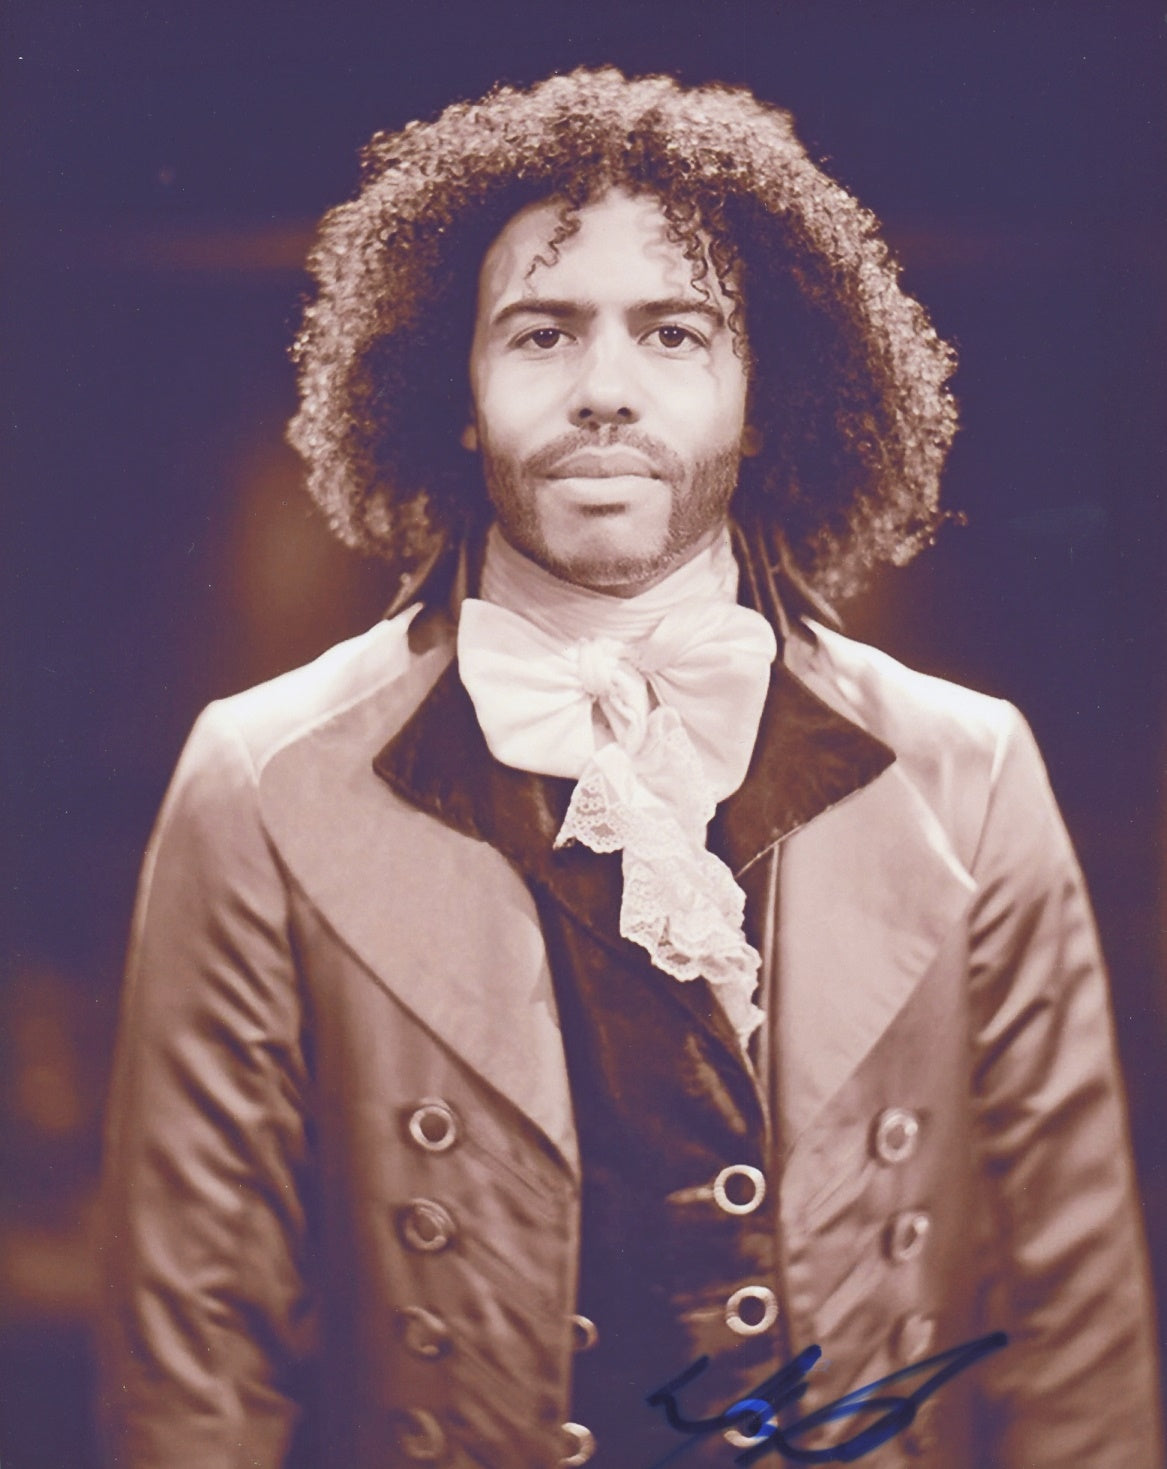 Daveed Diggs Signed 8x10 Photo